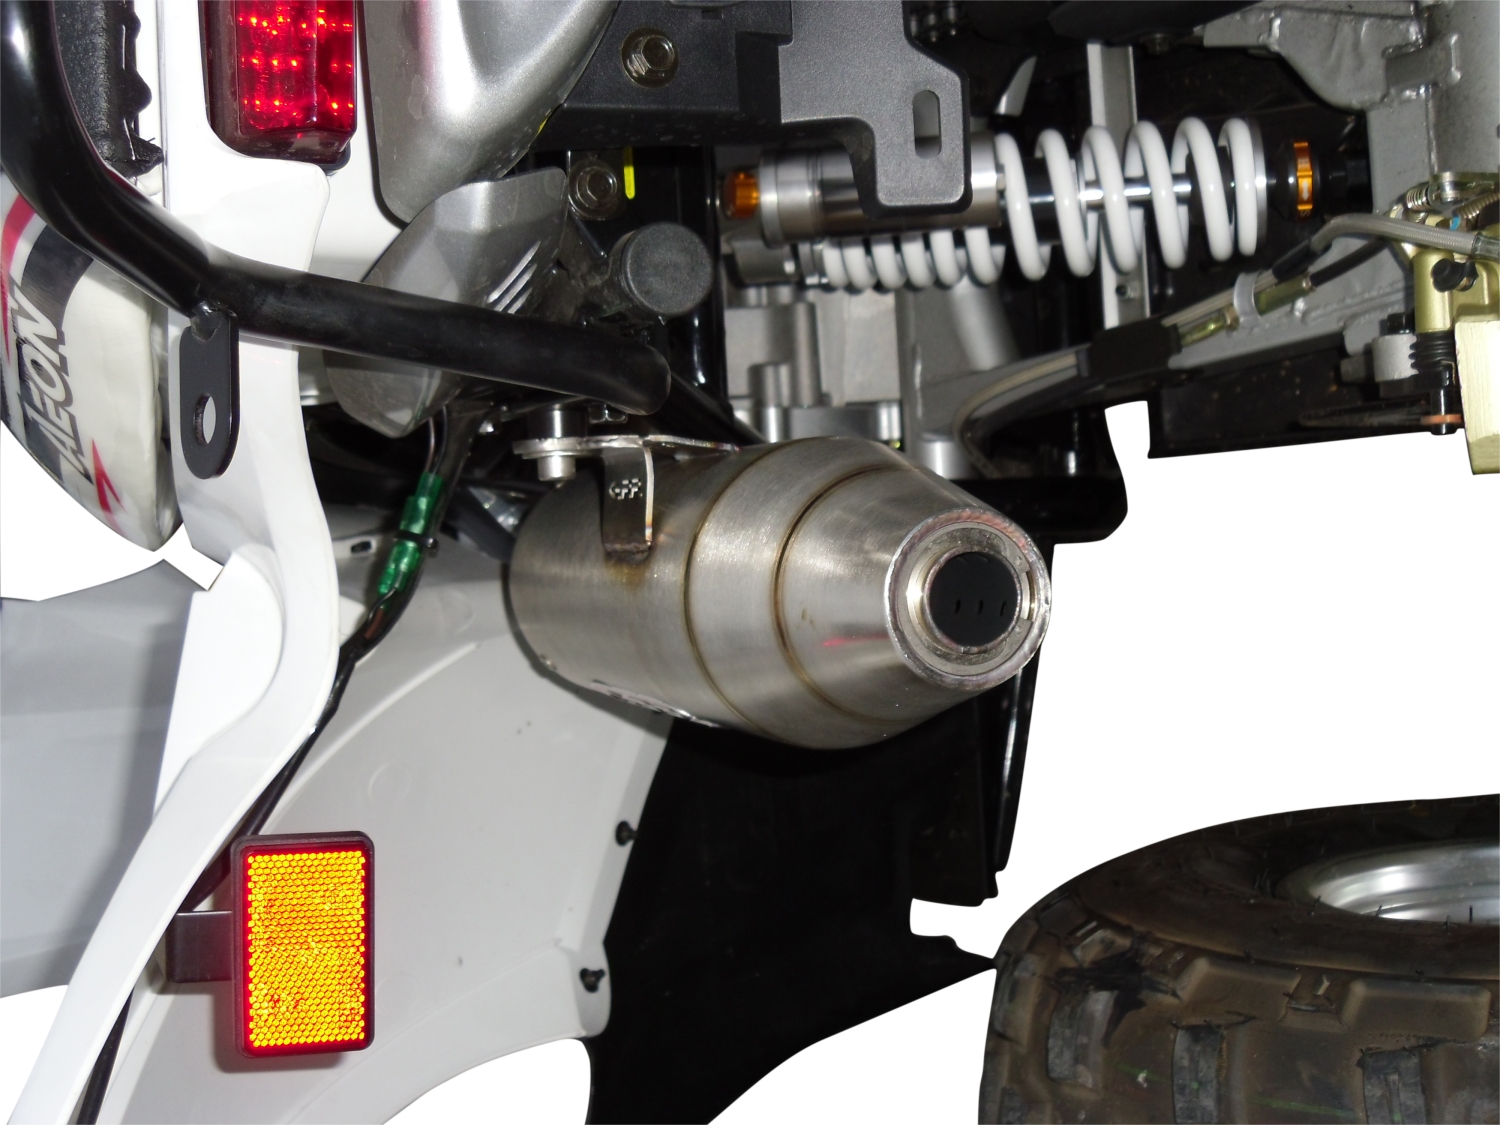 Exhaust system compatible with Aeon Cobra 400 2017-2020, Deeptone Atv, Homologated legal full system exhaust, including removable db killer 